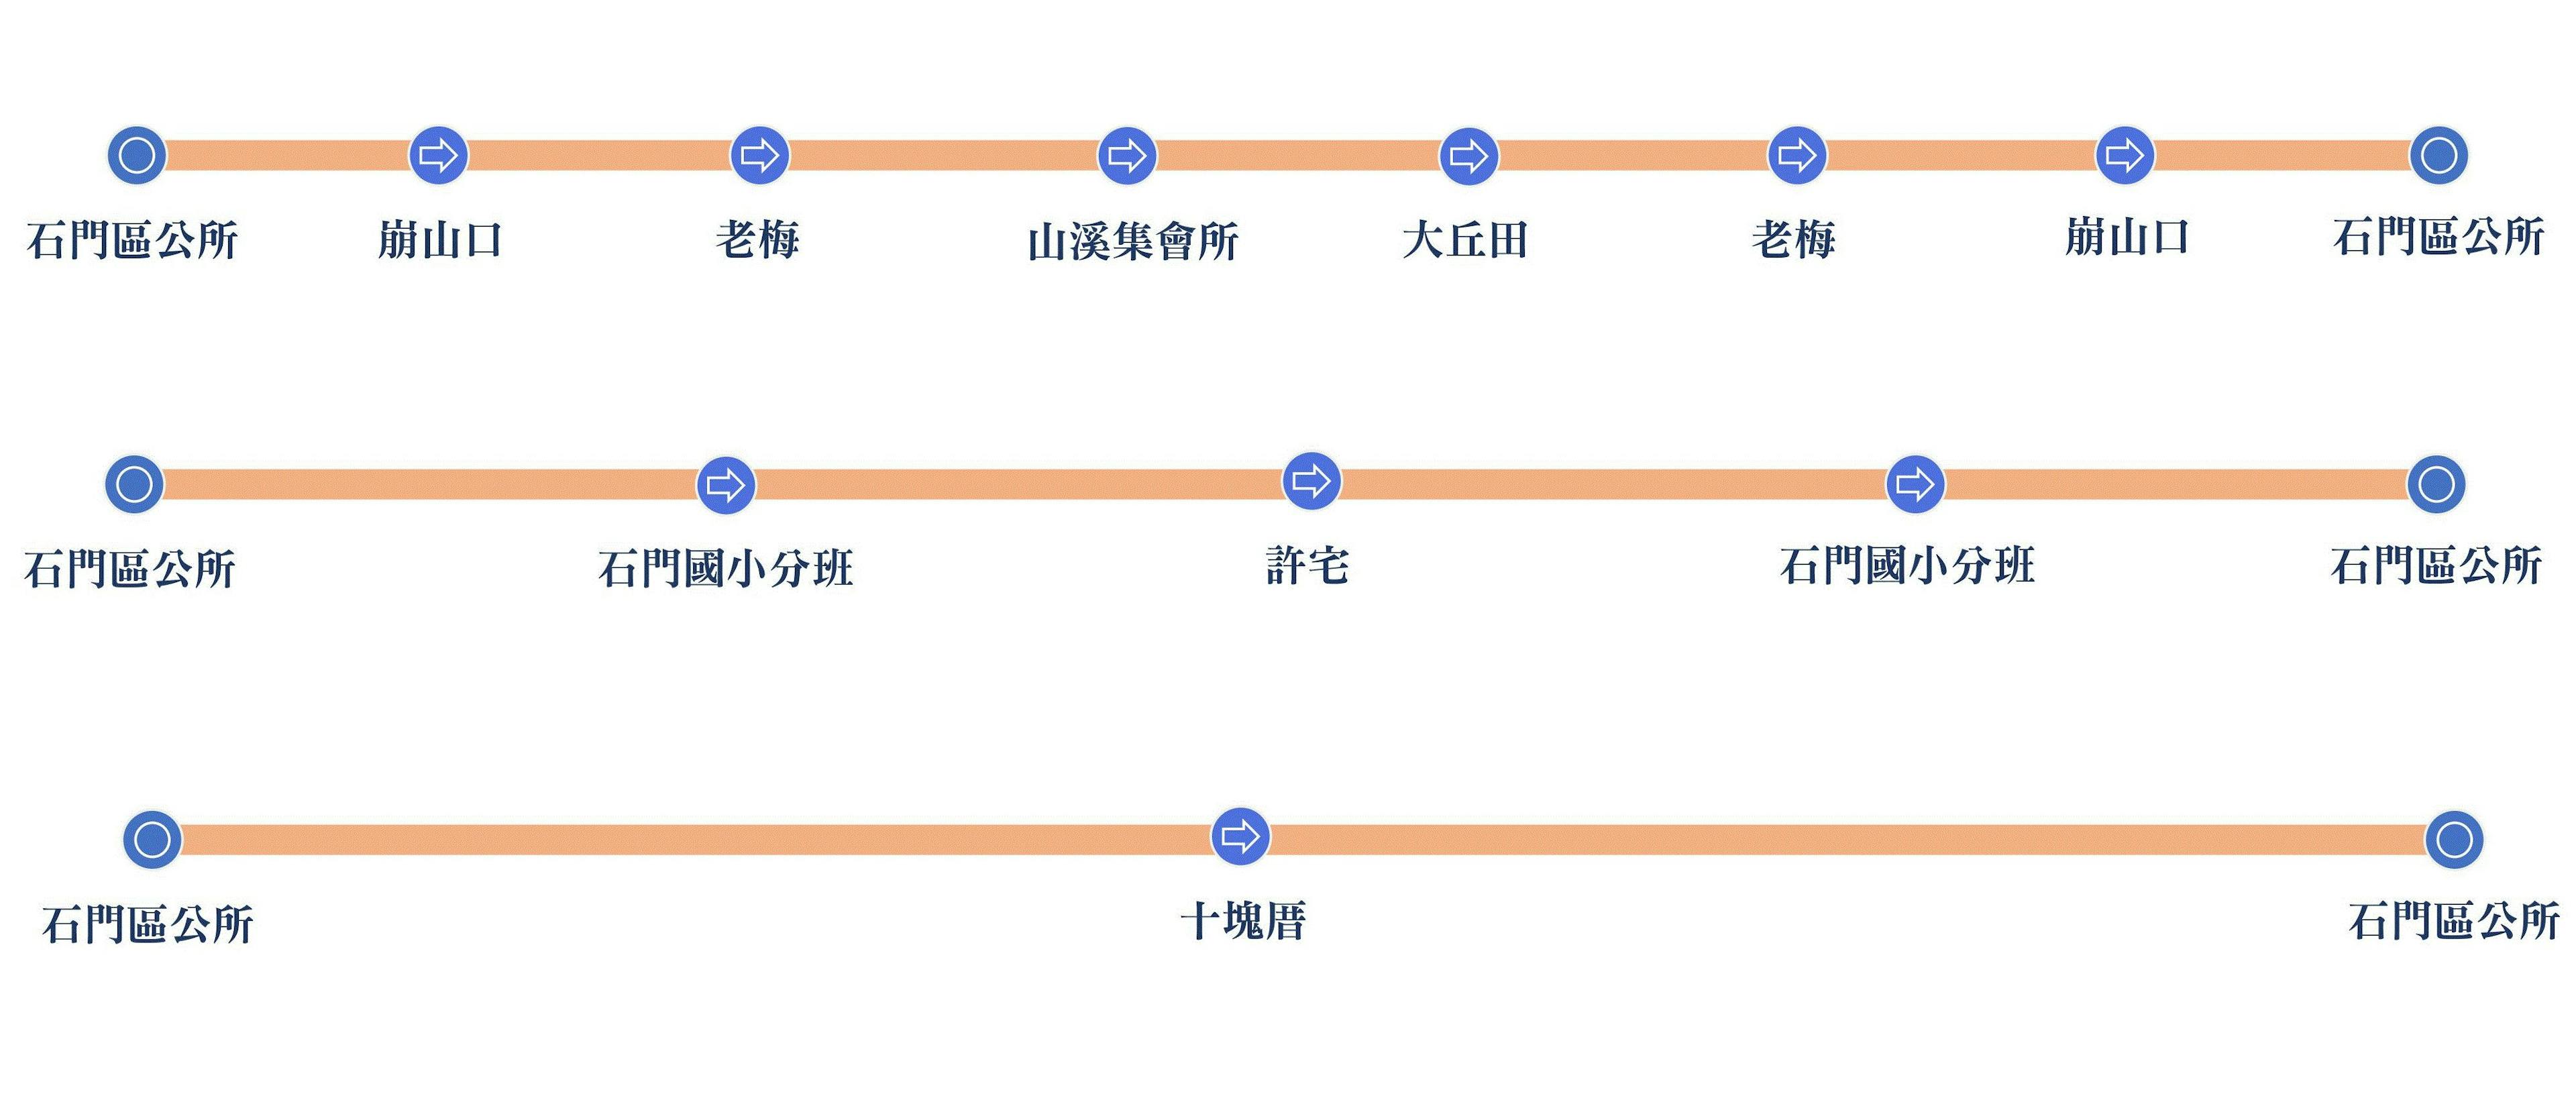 F151-0930Route Map-新北市 Bus